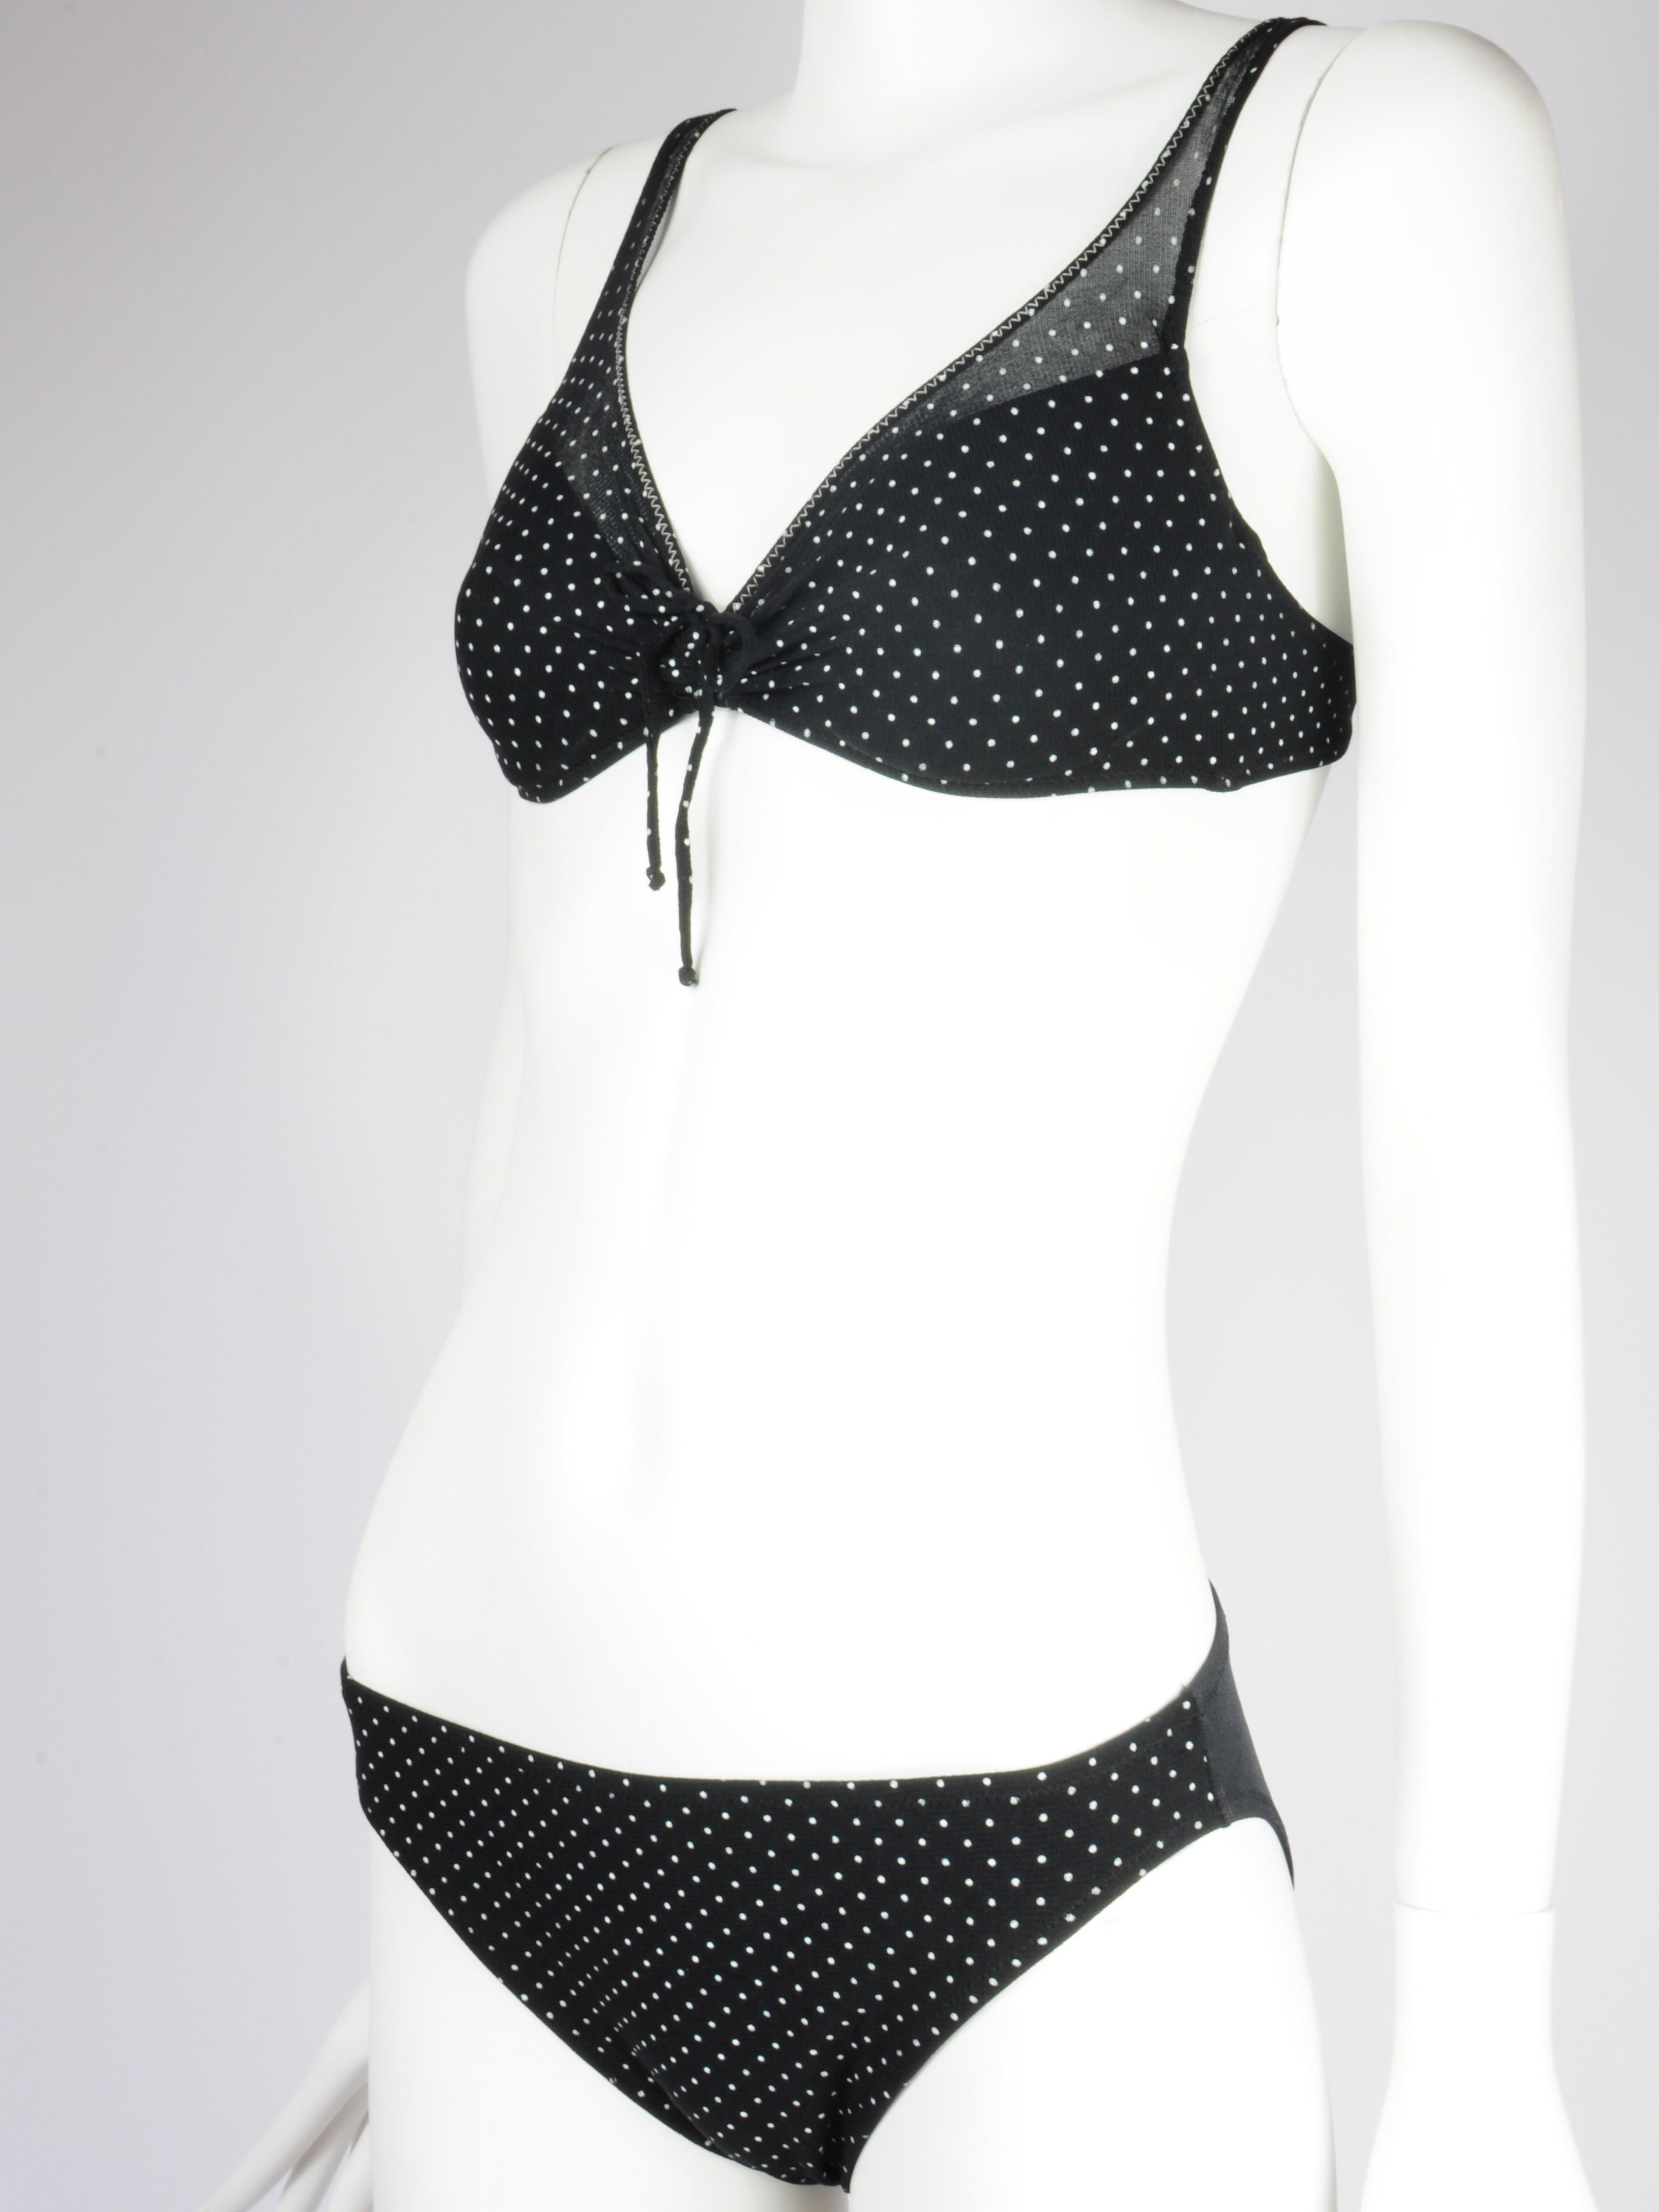 La Perla polkadot mesh bikini set from Malizia by La Perla from the 1990s. A soft mesh fabric with tiny polka dots printed on it. The mesh is solely sheer above the cups. The back of this La Perla bikini bottom is without mesh. The top features a